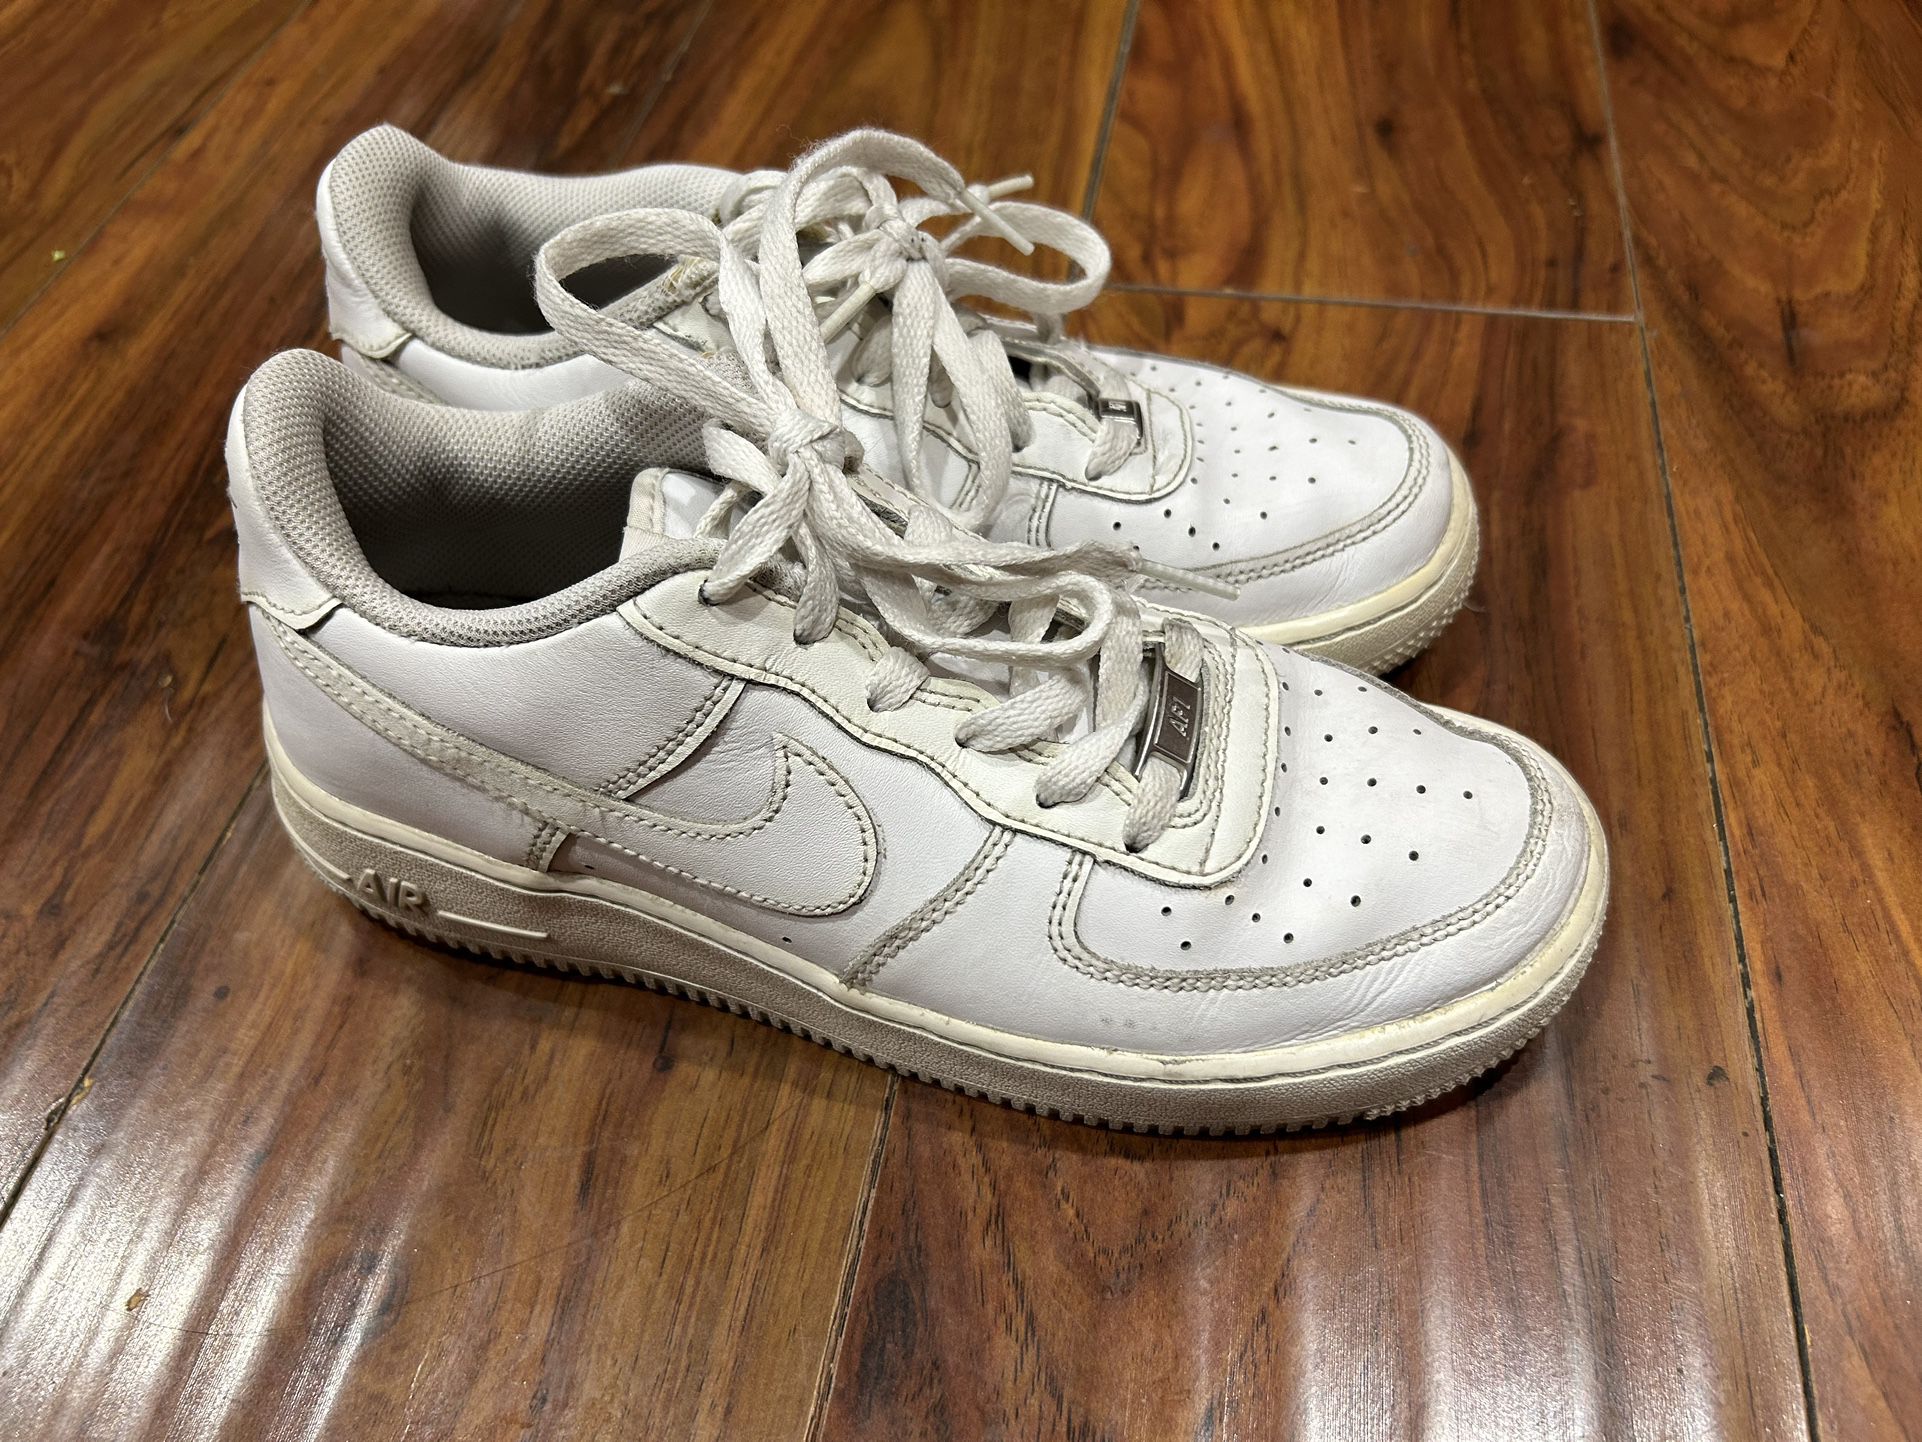 Men’s/youth Size 6.5 Nike Used Shoes